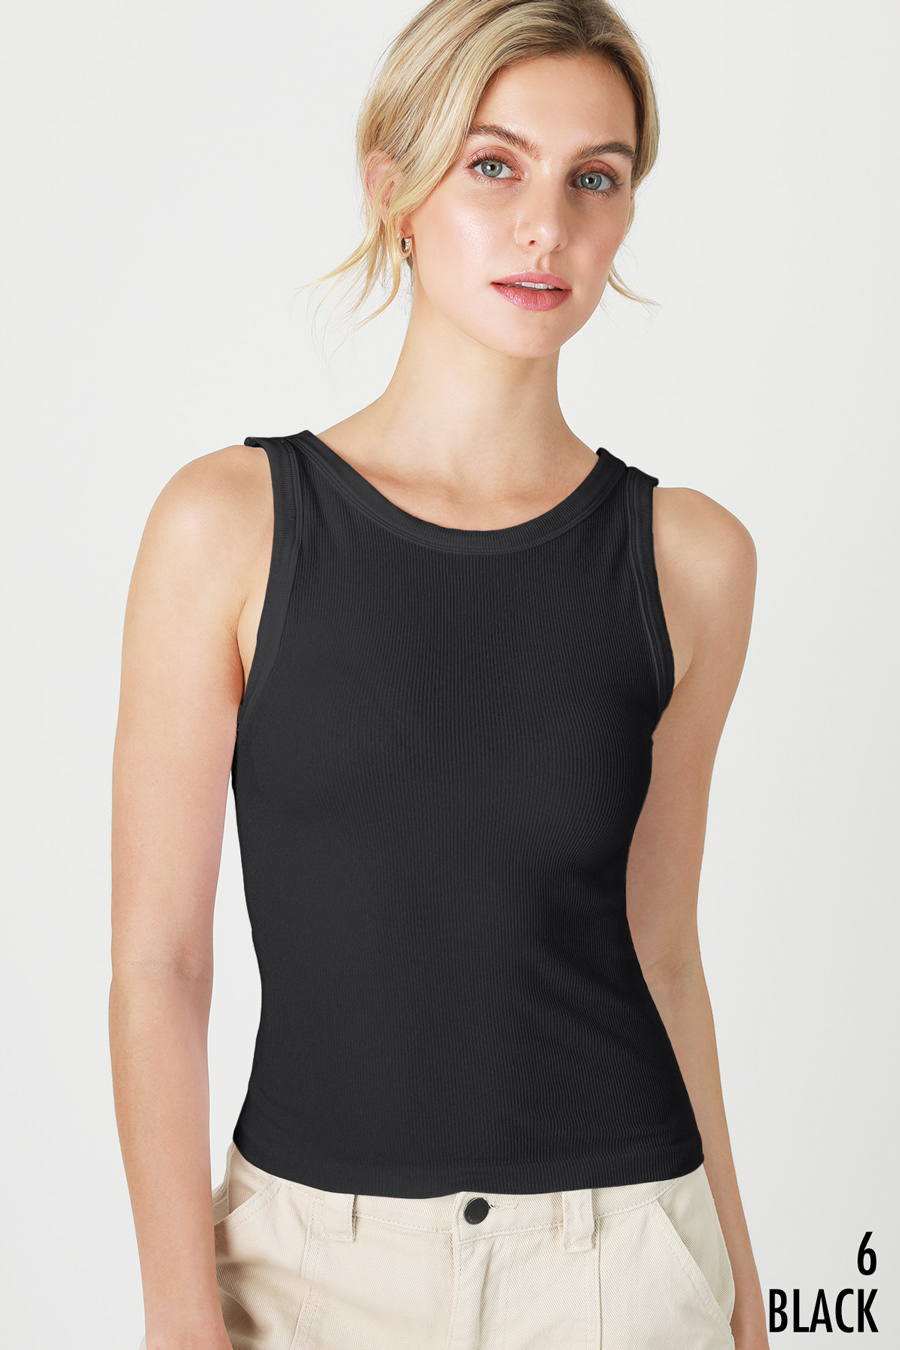 Seamless long tank top in the color black.